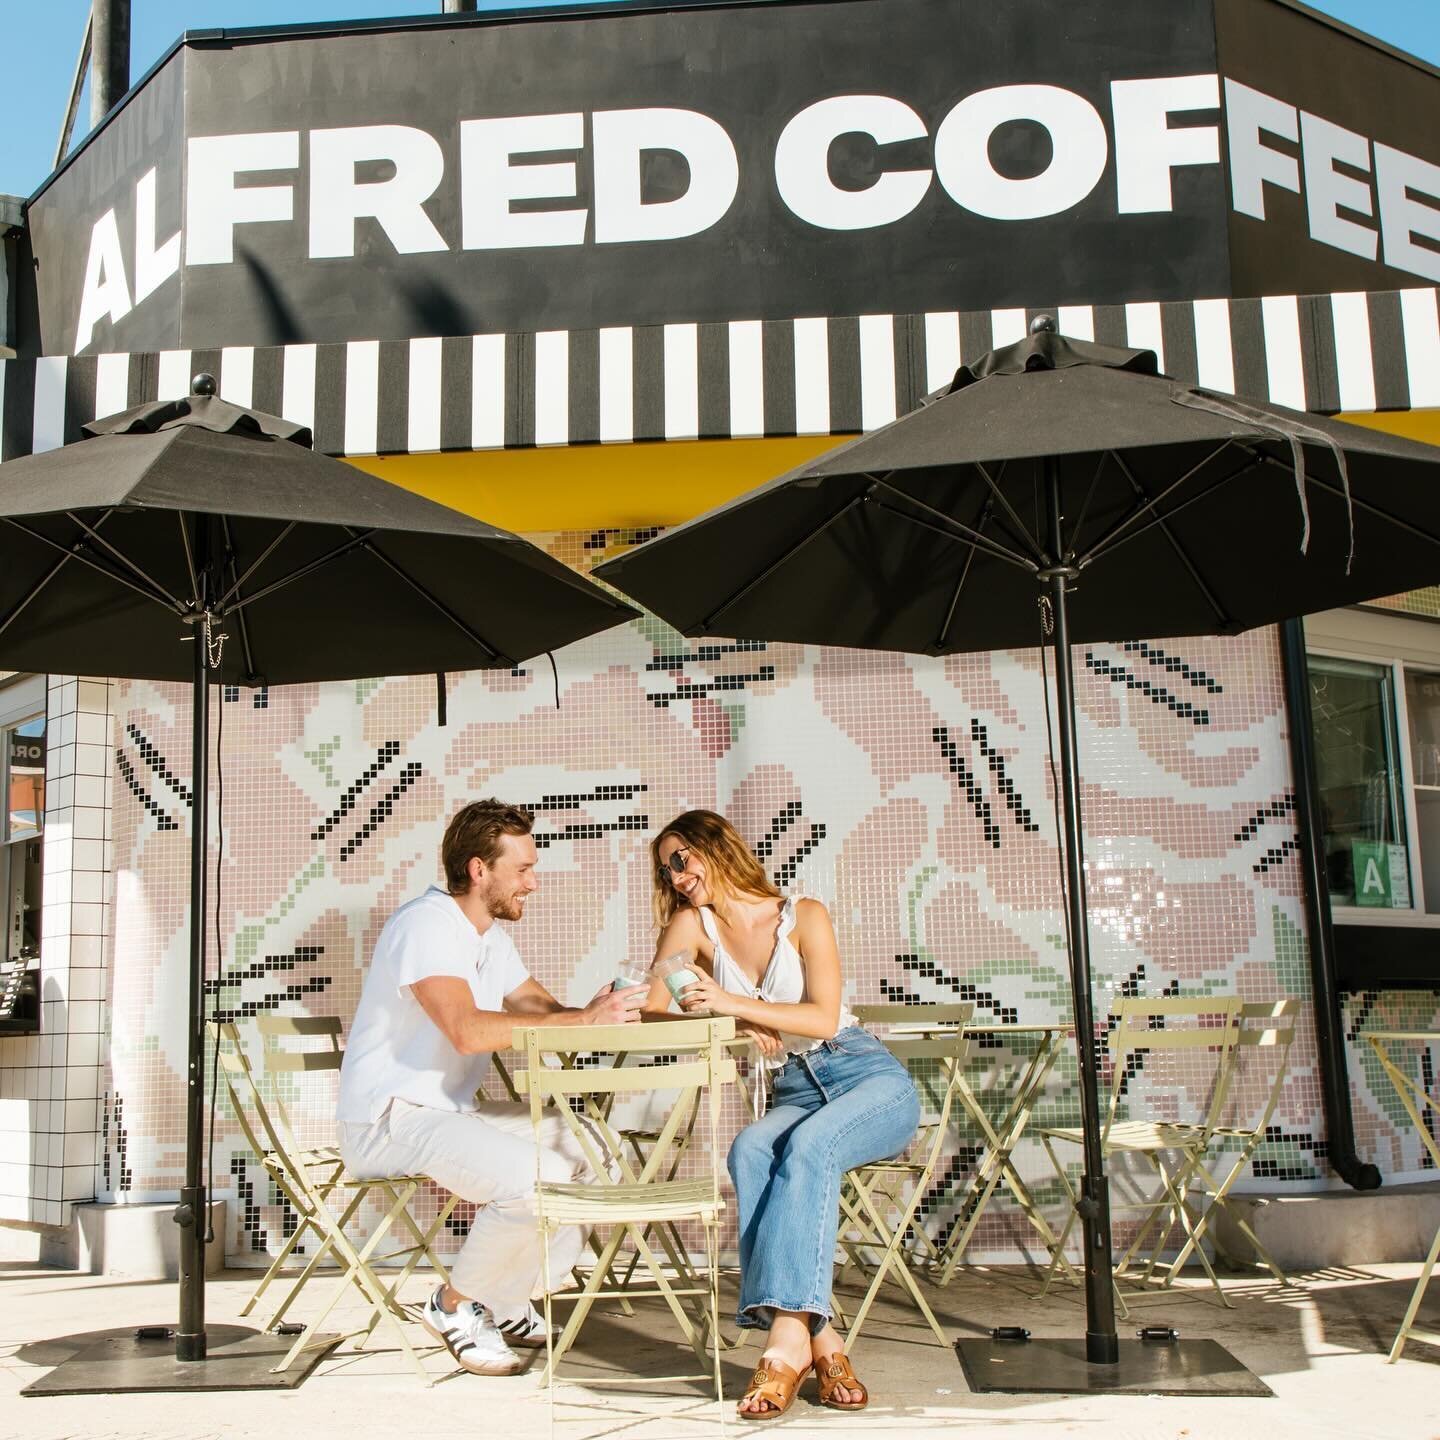 Sippin&rsquo; magic at Alfred Coffee, where every cup is a love letter to coffee lovers in Burbank, LA ☕✨ #BrewingHappiness 
&hellip;
Photo by: @georgeduchannes 
&hellip;
#alfredcoffee #couples #burbank #cityofangels #losangeles #coffeelover #alfredc